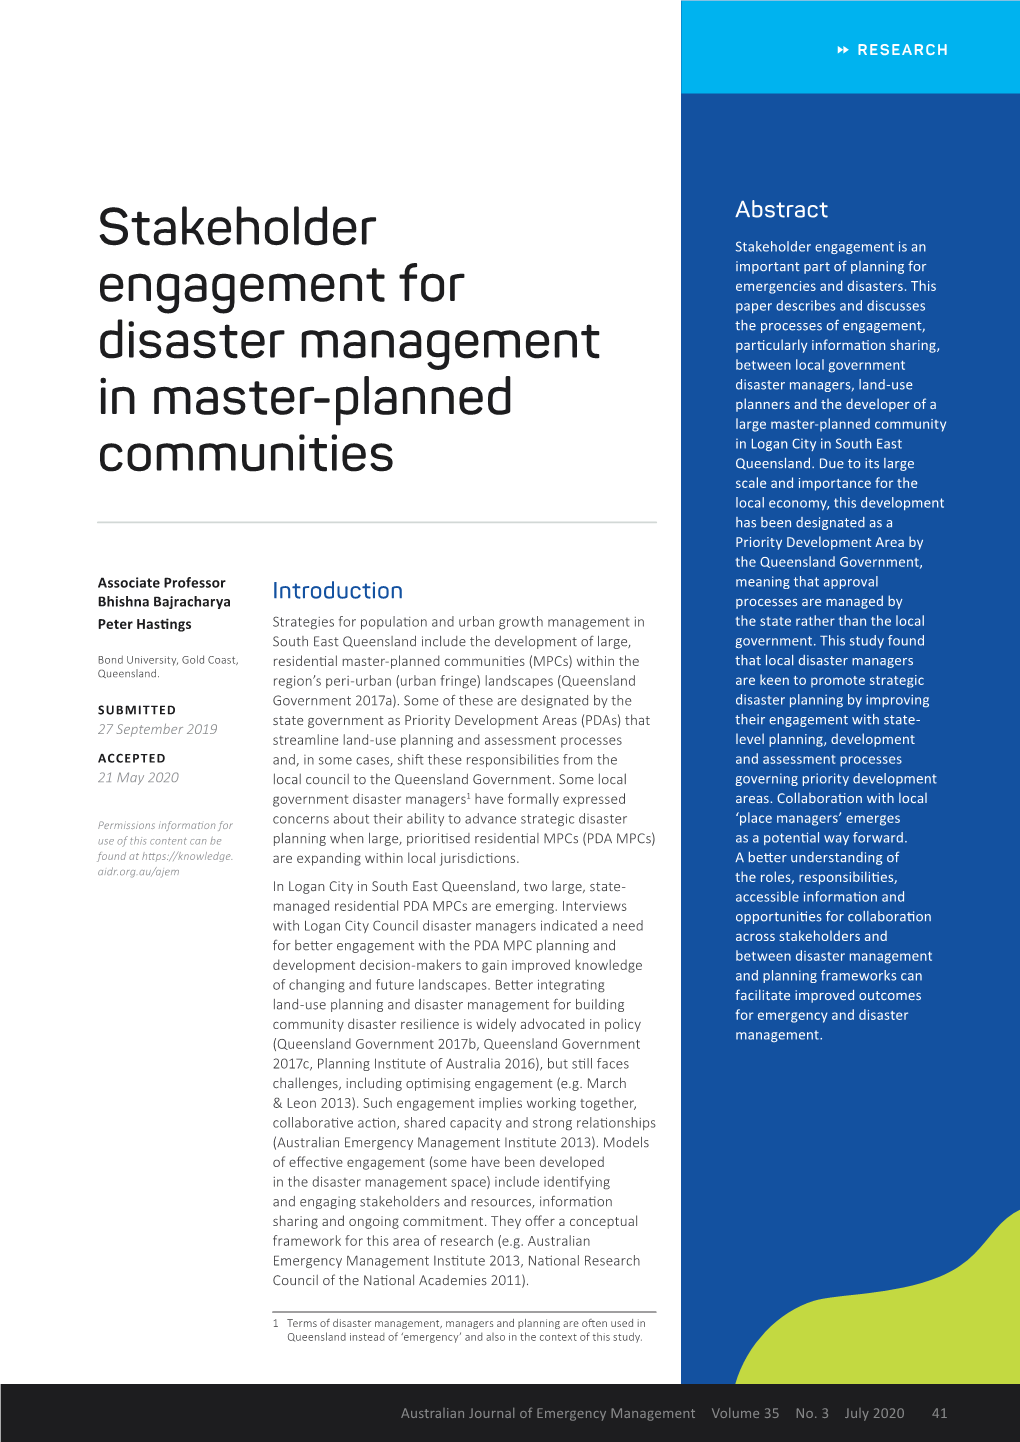 Stakeholder Engagement for Disaster Management in Master-Planned